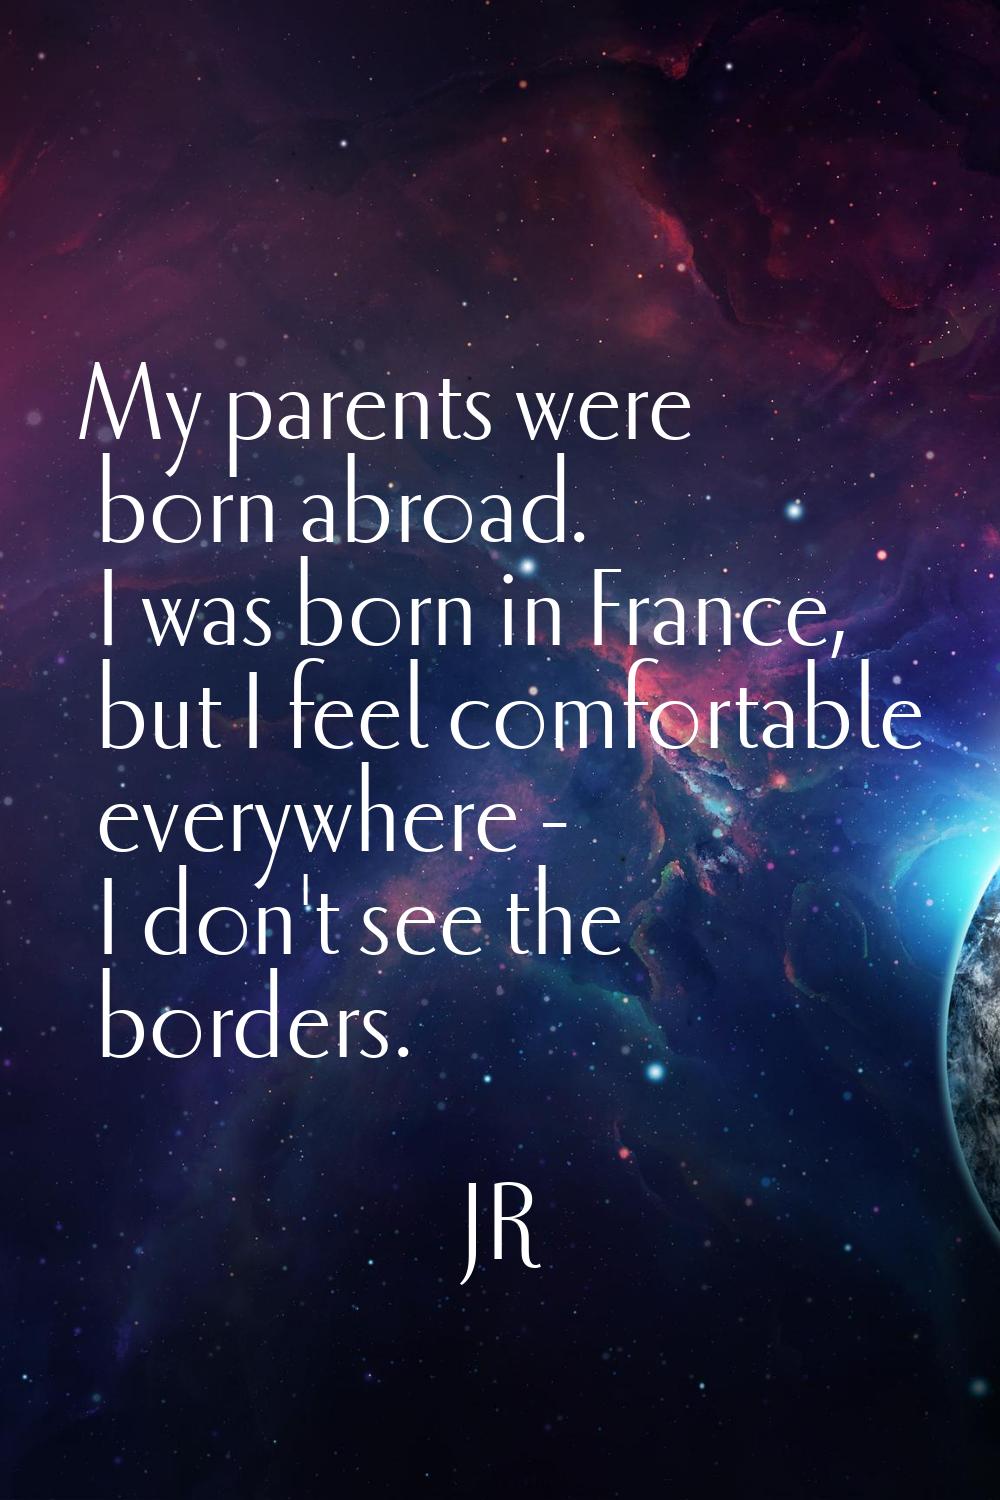 My parents were born abroad. I was born in France, but I feel comfortable everywhere - I don't see 